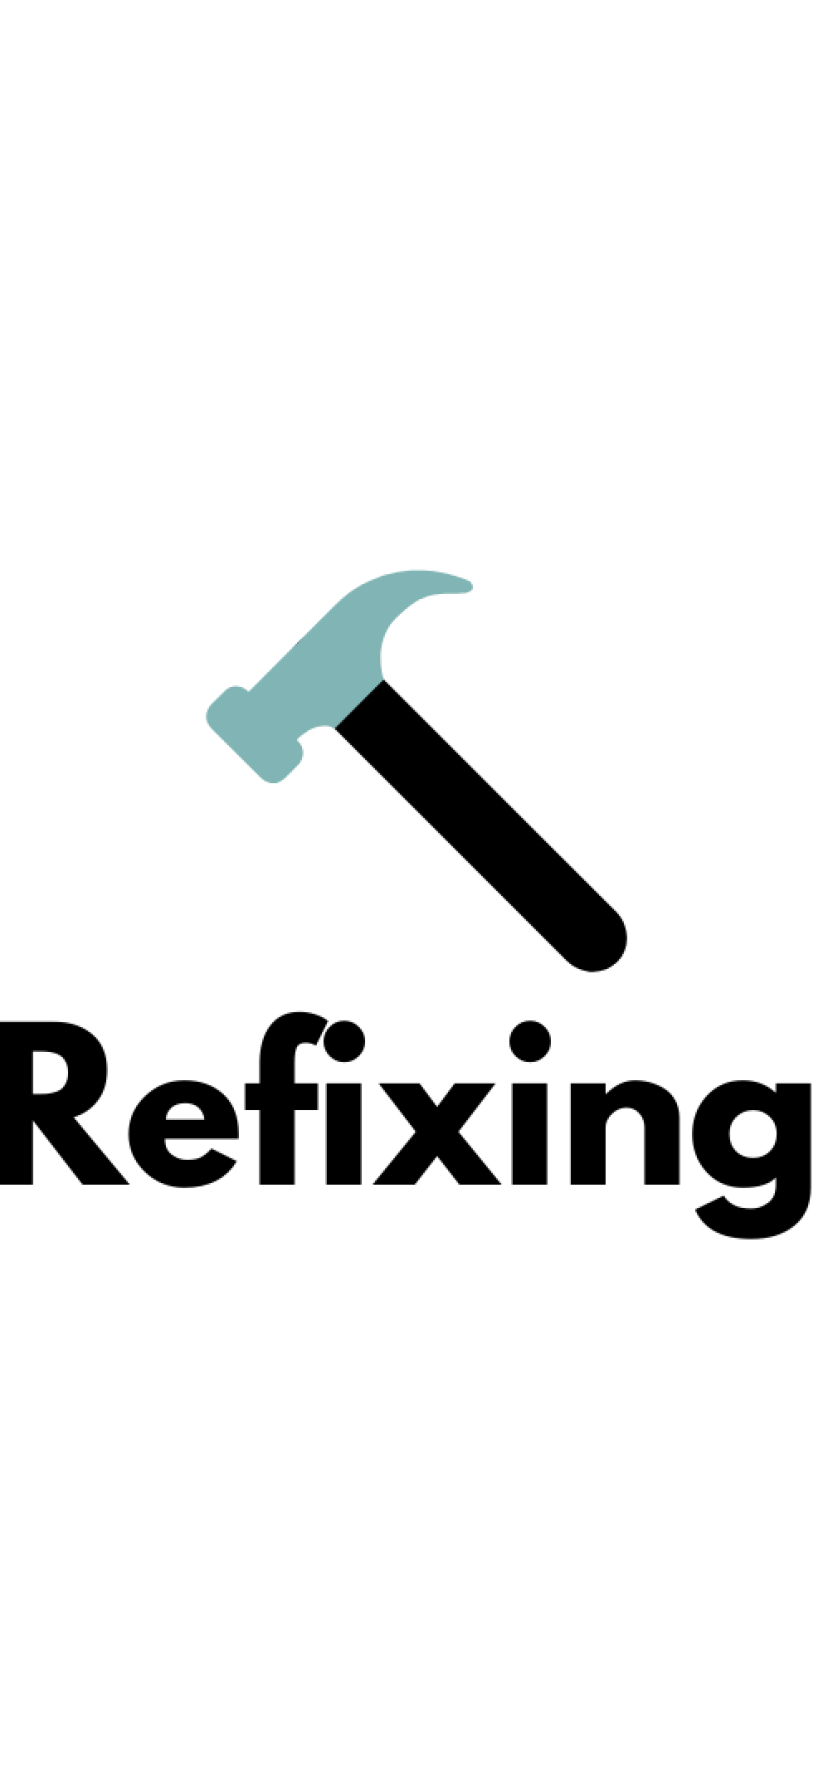 refixing.com domain name for sale